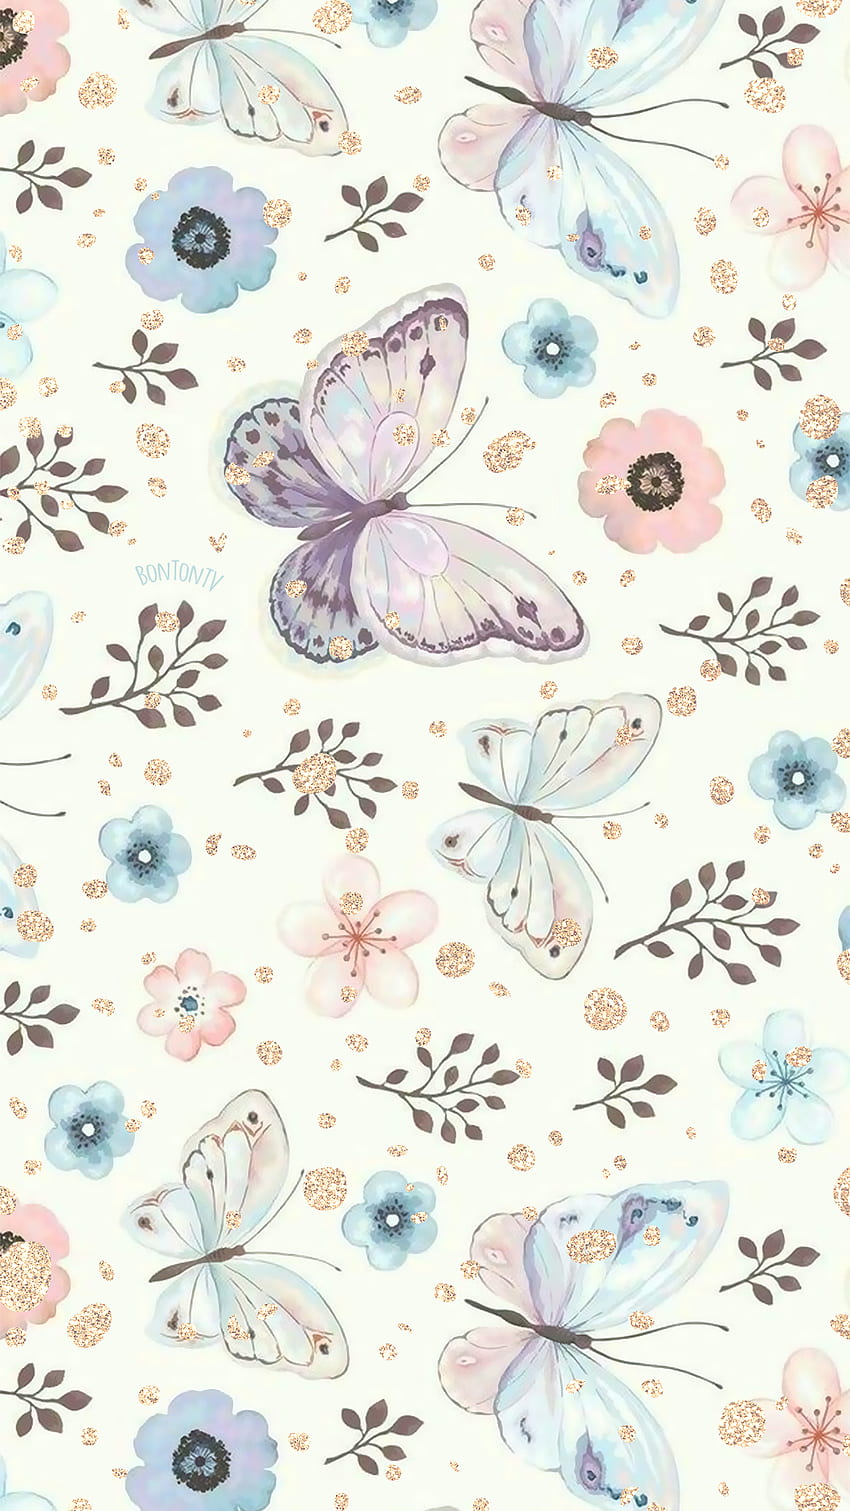 Telefonní tapety - - by Bonton TV - - iPhone, Android in 2020. Butterfly iphone, Butterfly watercolor, Artsy iphone, Feminine HD phone wallpaper